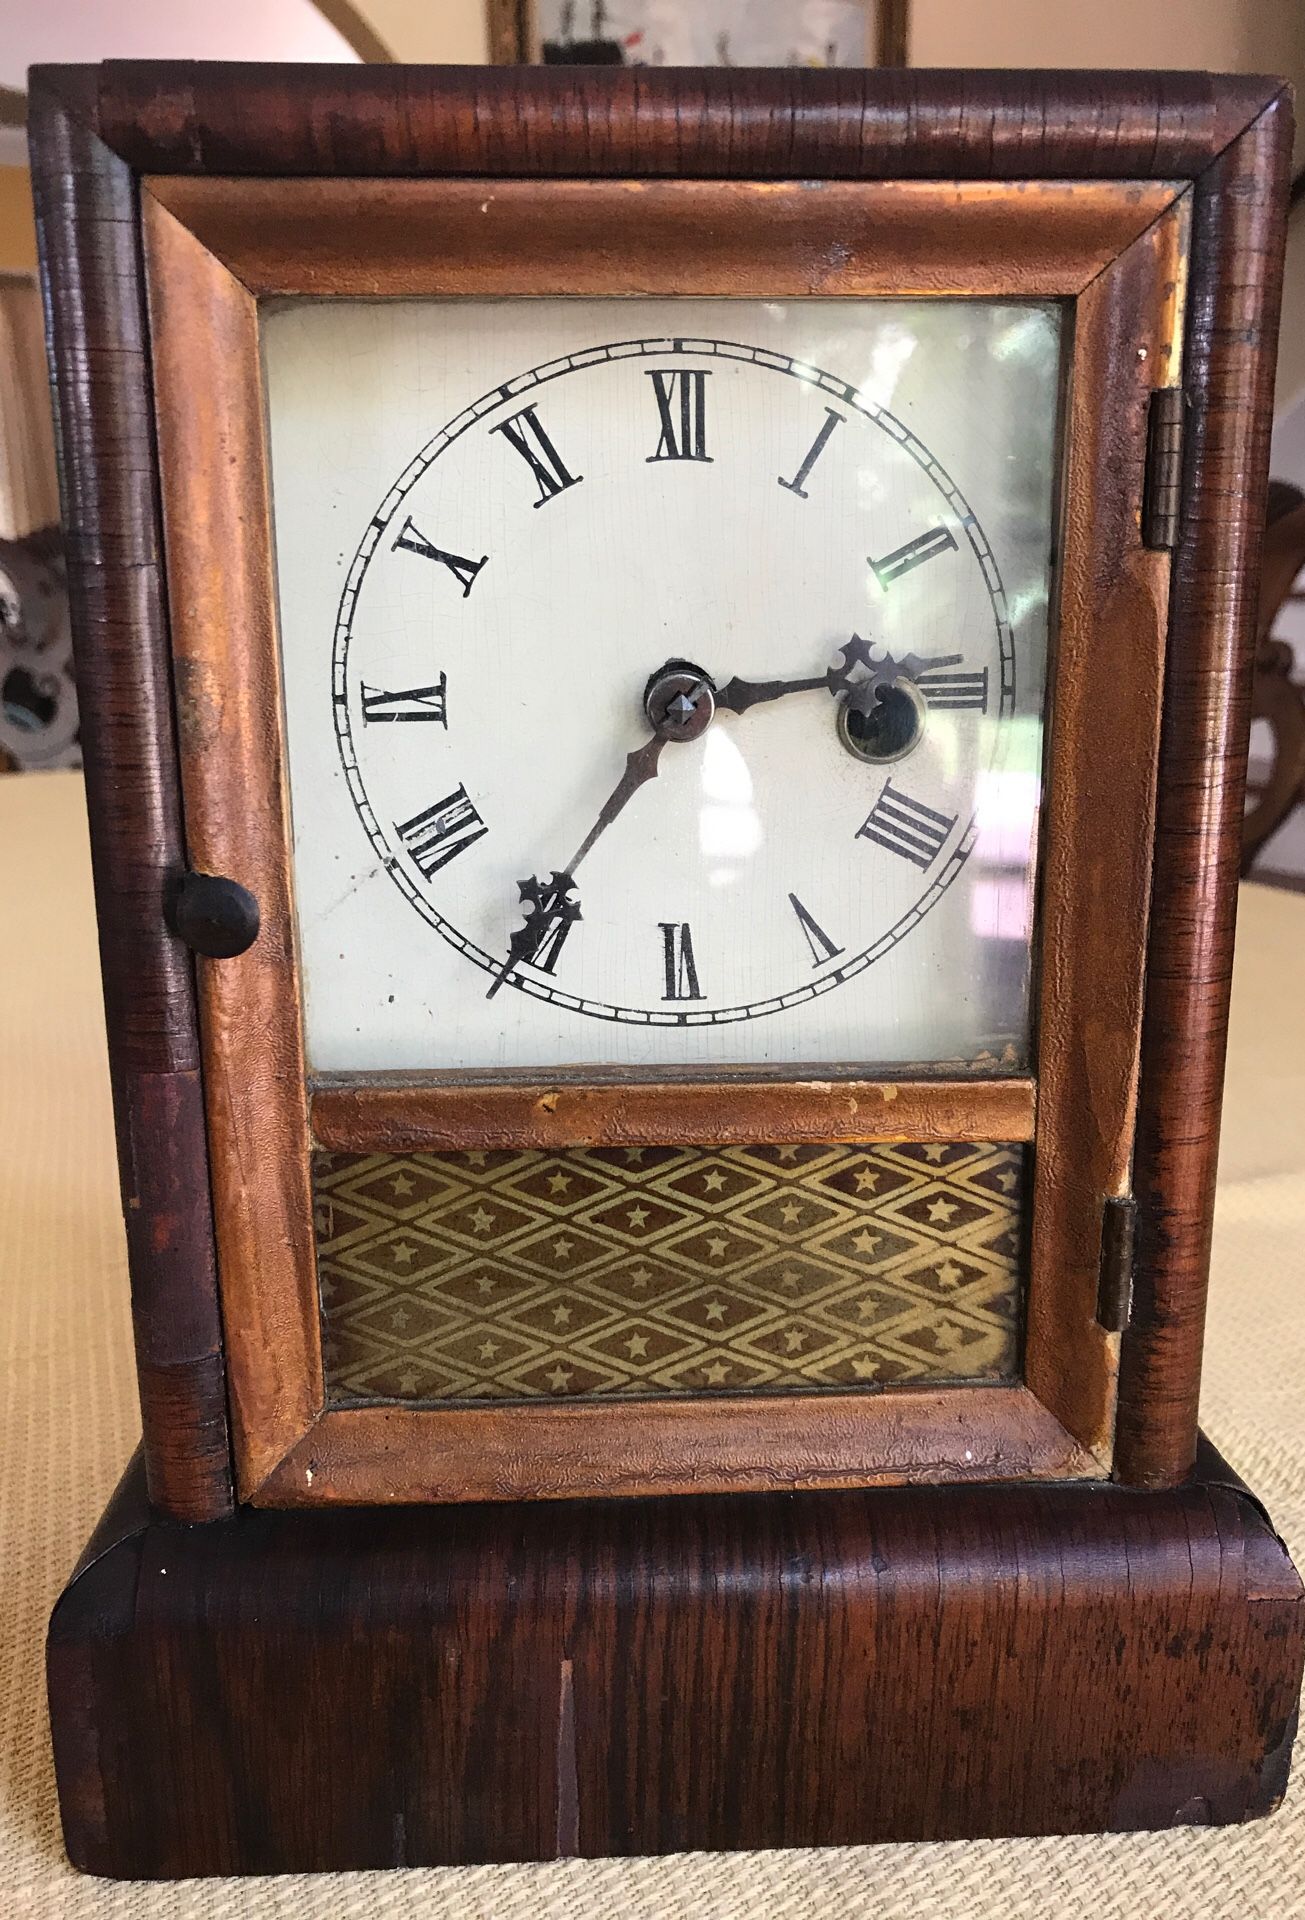 Antique wind up clock by Jerome and company manufactures of eight and one day brass clocks of New Haven Connecticut